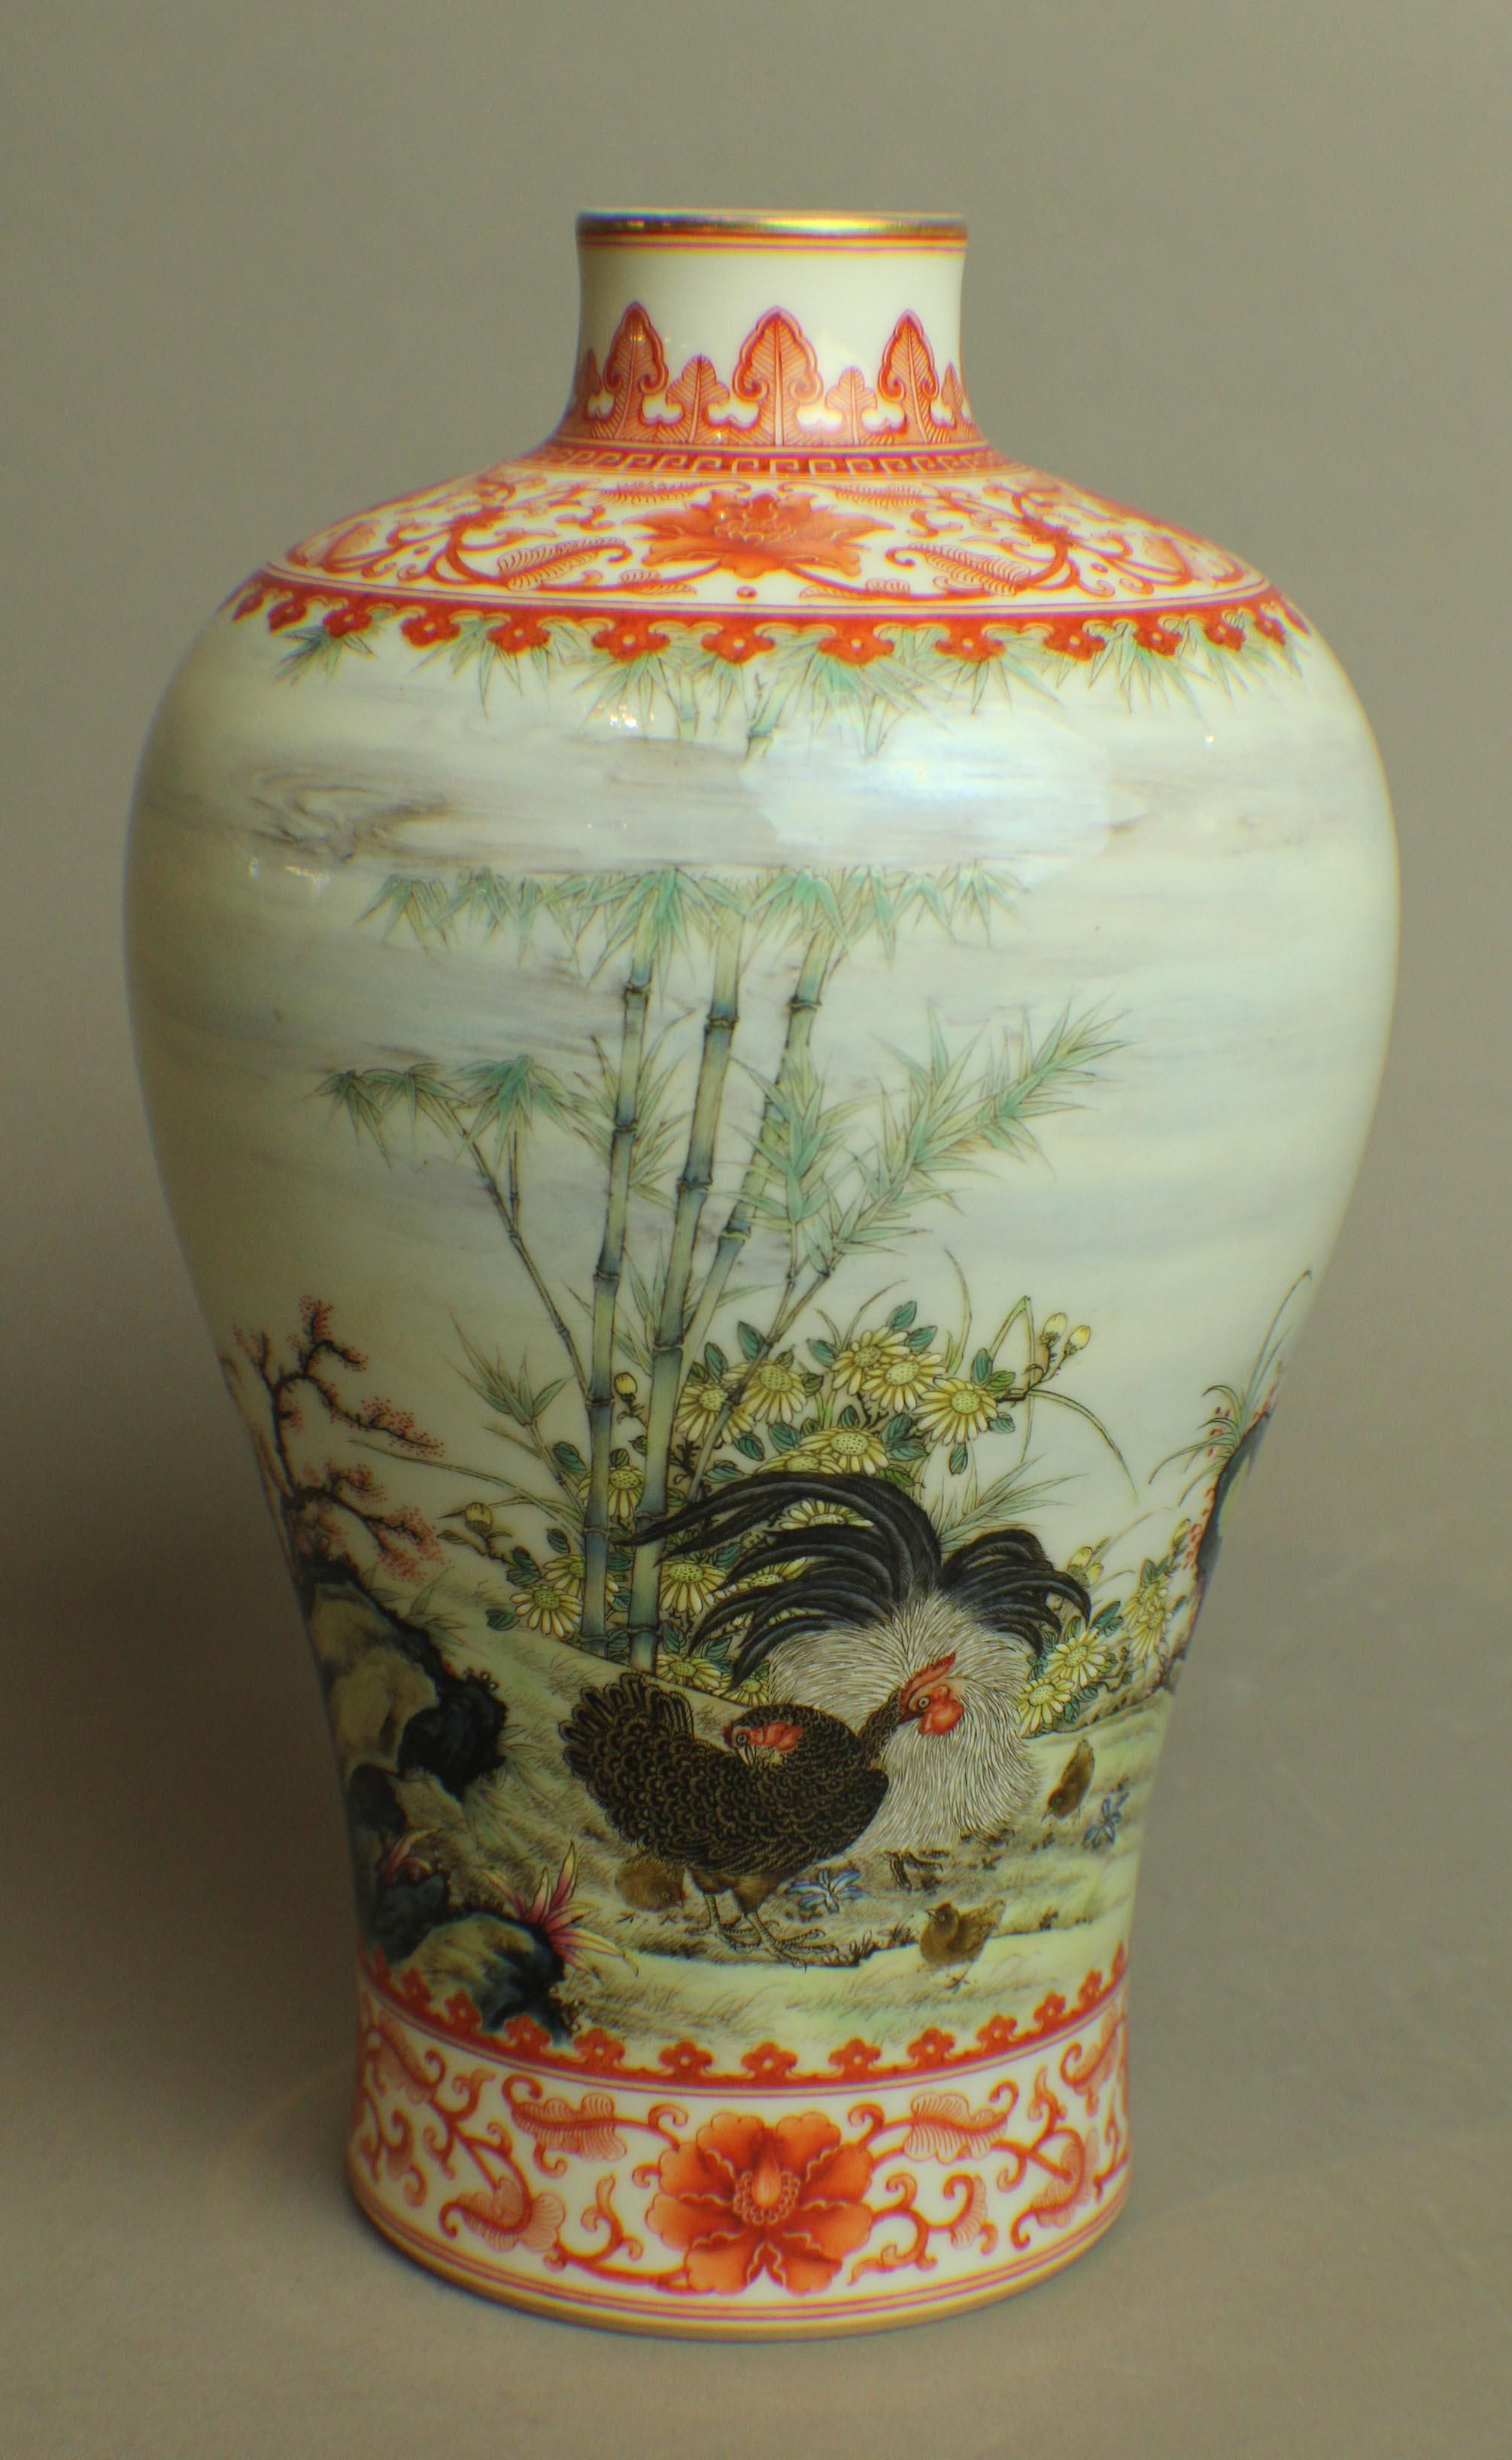 29 Fabulous Satsuma Vase Markings 2024 free download satsuma vase markings of 51bidlive ec29bc28daec2adaec2acc2becc29fc2becoc2a2ac2afc2b9ec2b8aec2a2c285cc293c2b6 a famille rose with copper red throughout 51bidlive ec29b